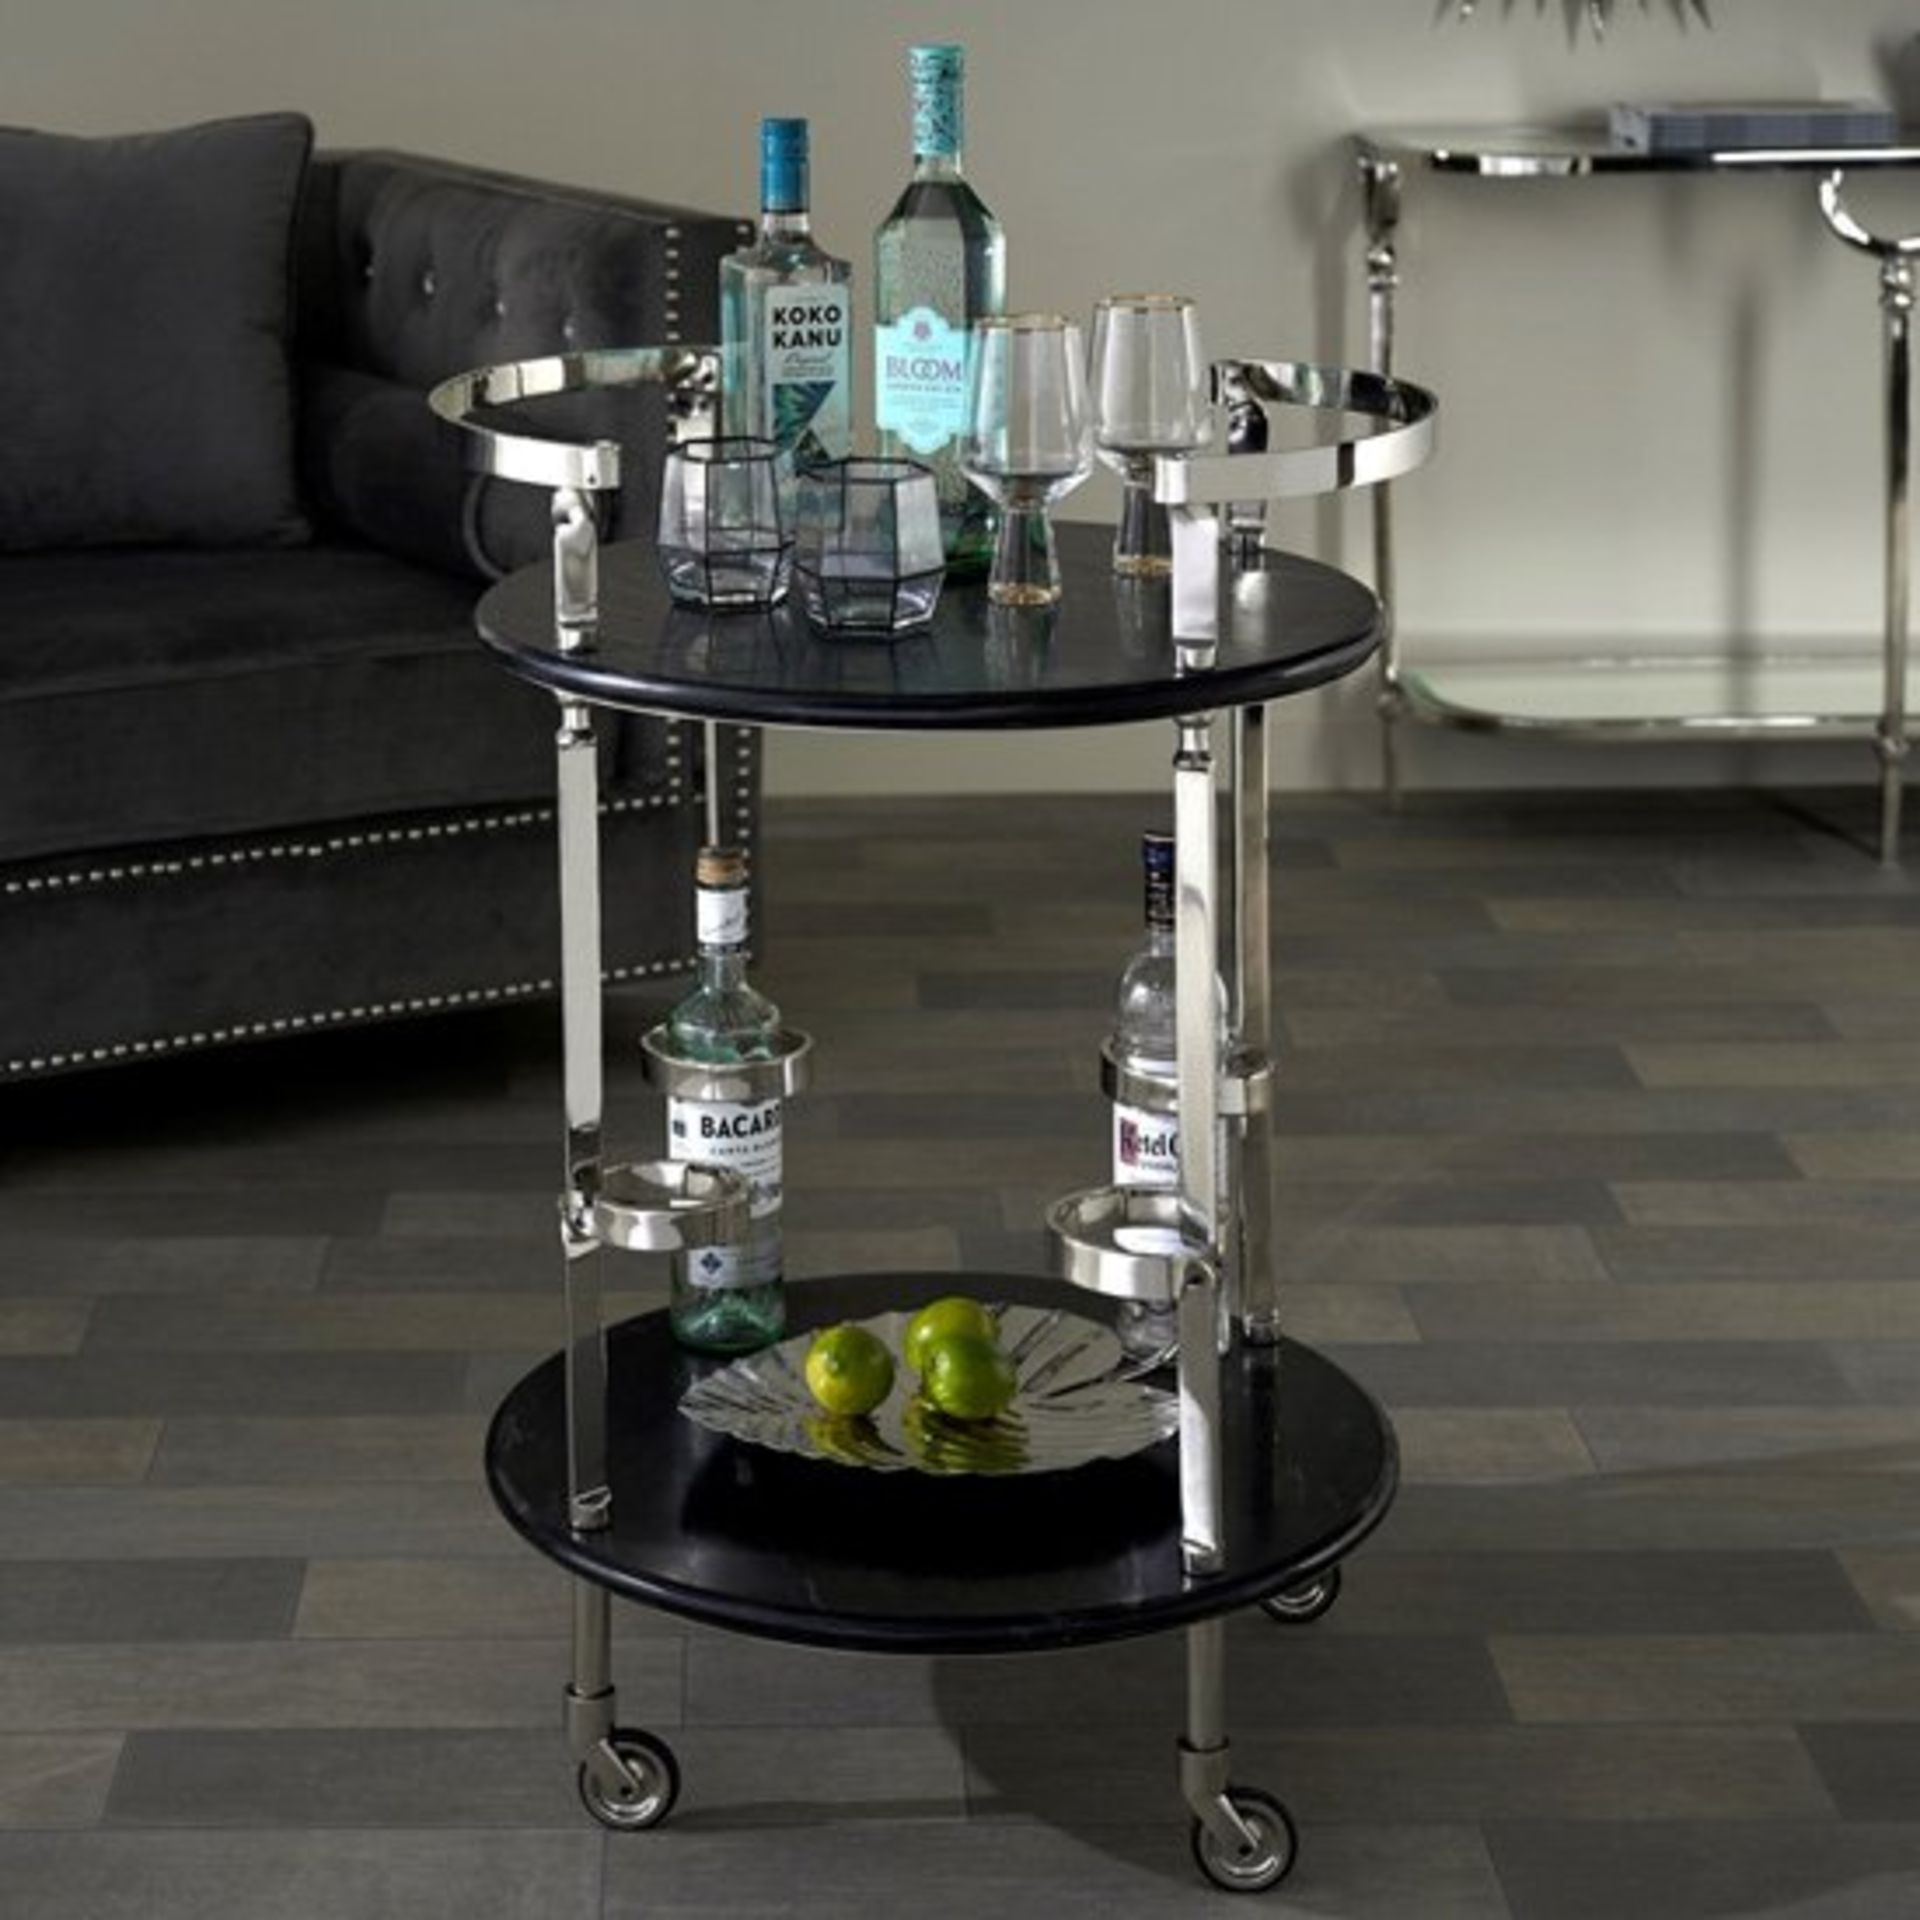 Timothy Oulton Deco Bar Cart Black Marble-Top And Nickel Bar Cart This Luxe, Marble-Topped Bar